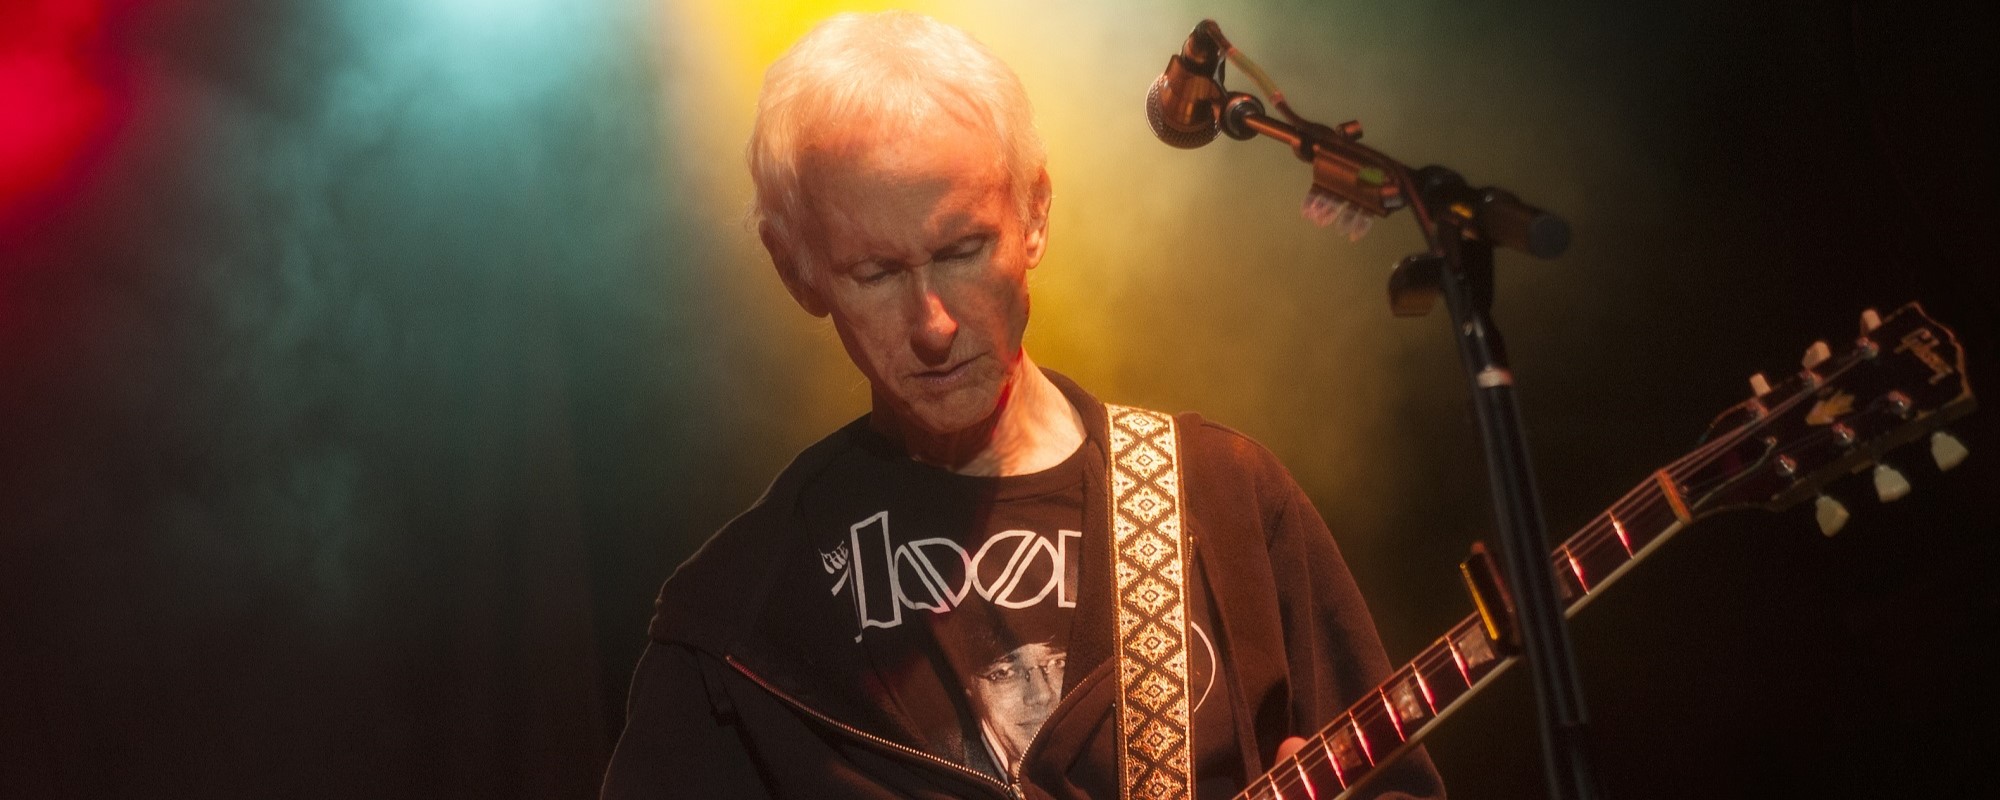 Watch Doors’ Robby Krieger Party with Guy in Bunny Costume in His New Video “Ricochet Rabbit”